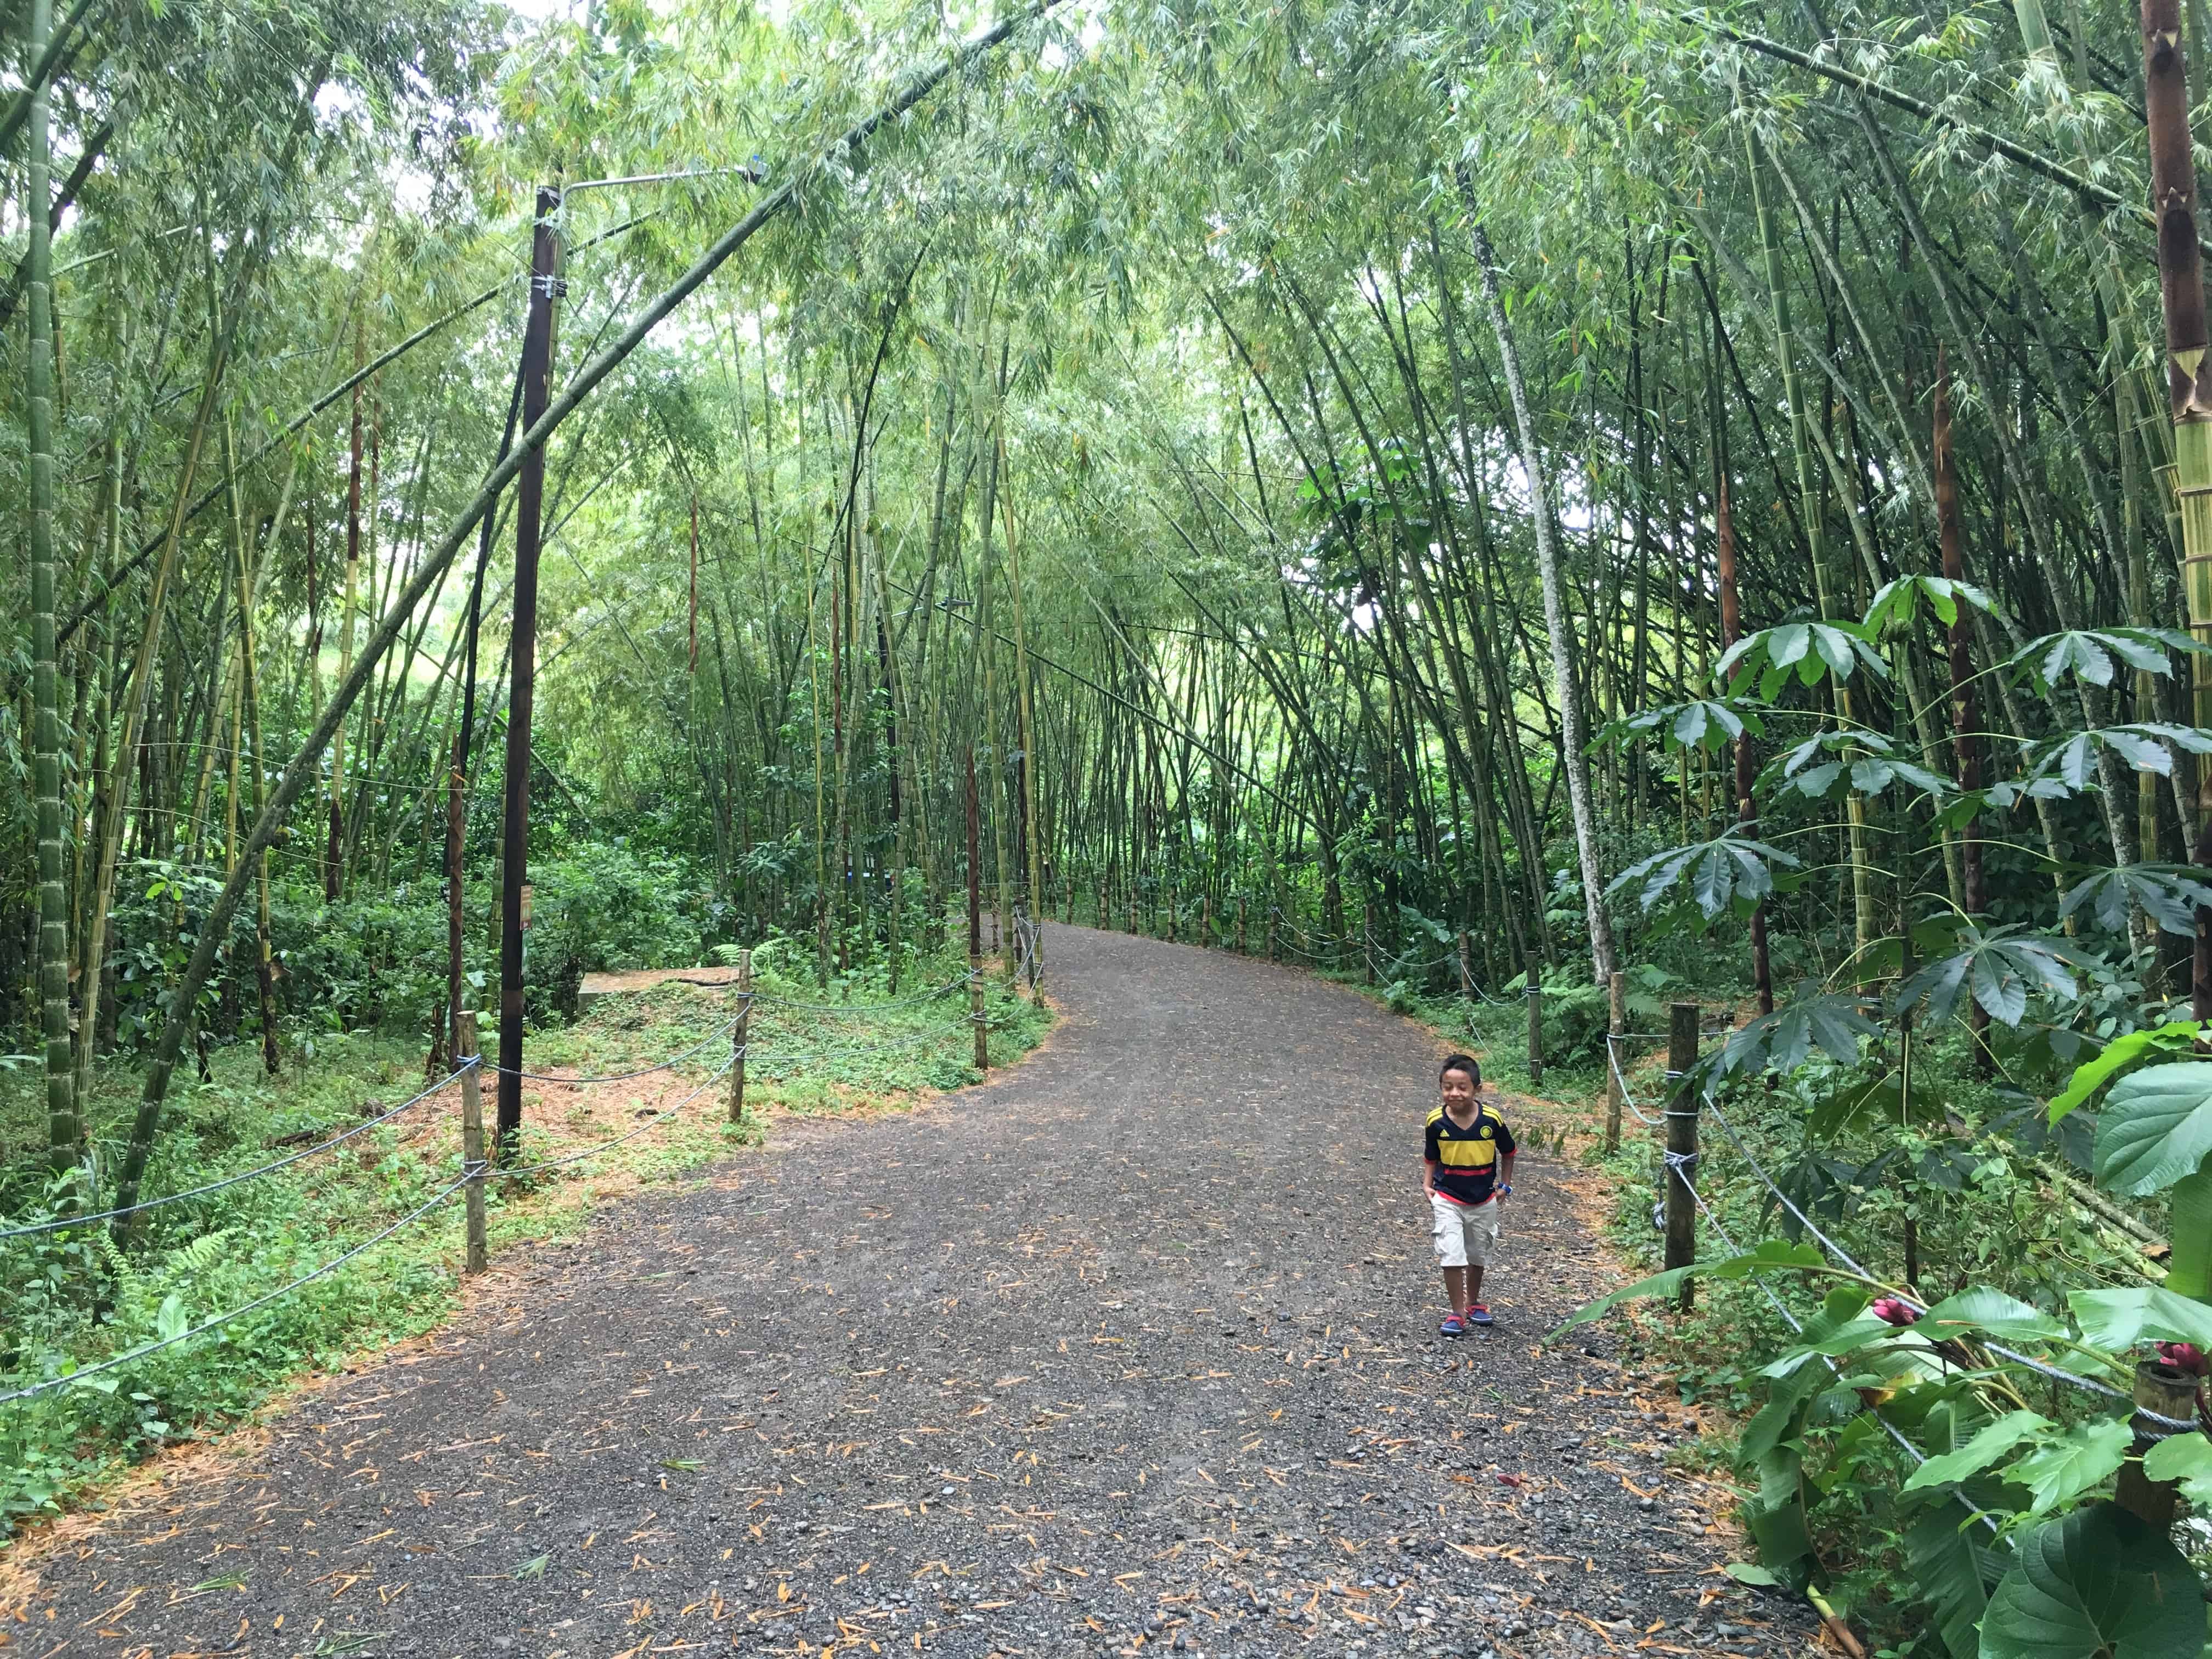 Bamboo forest at Bioparque Ukumarí in Risaralda, Colombia